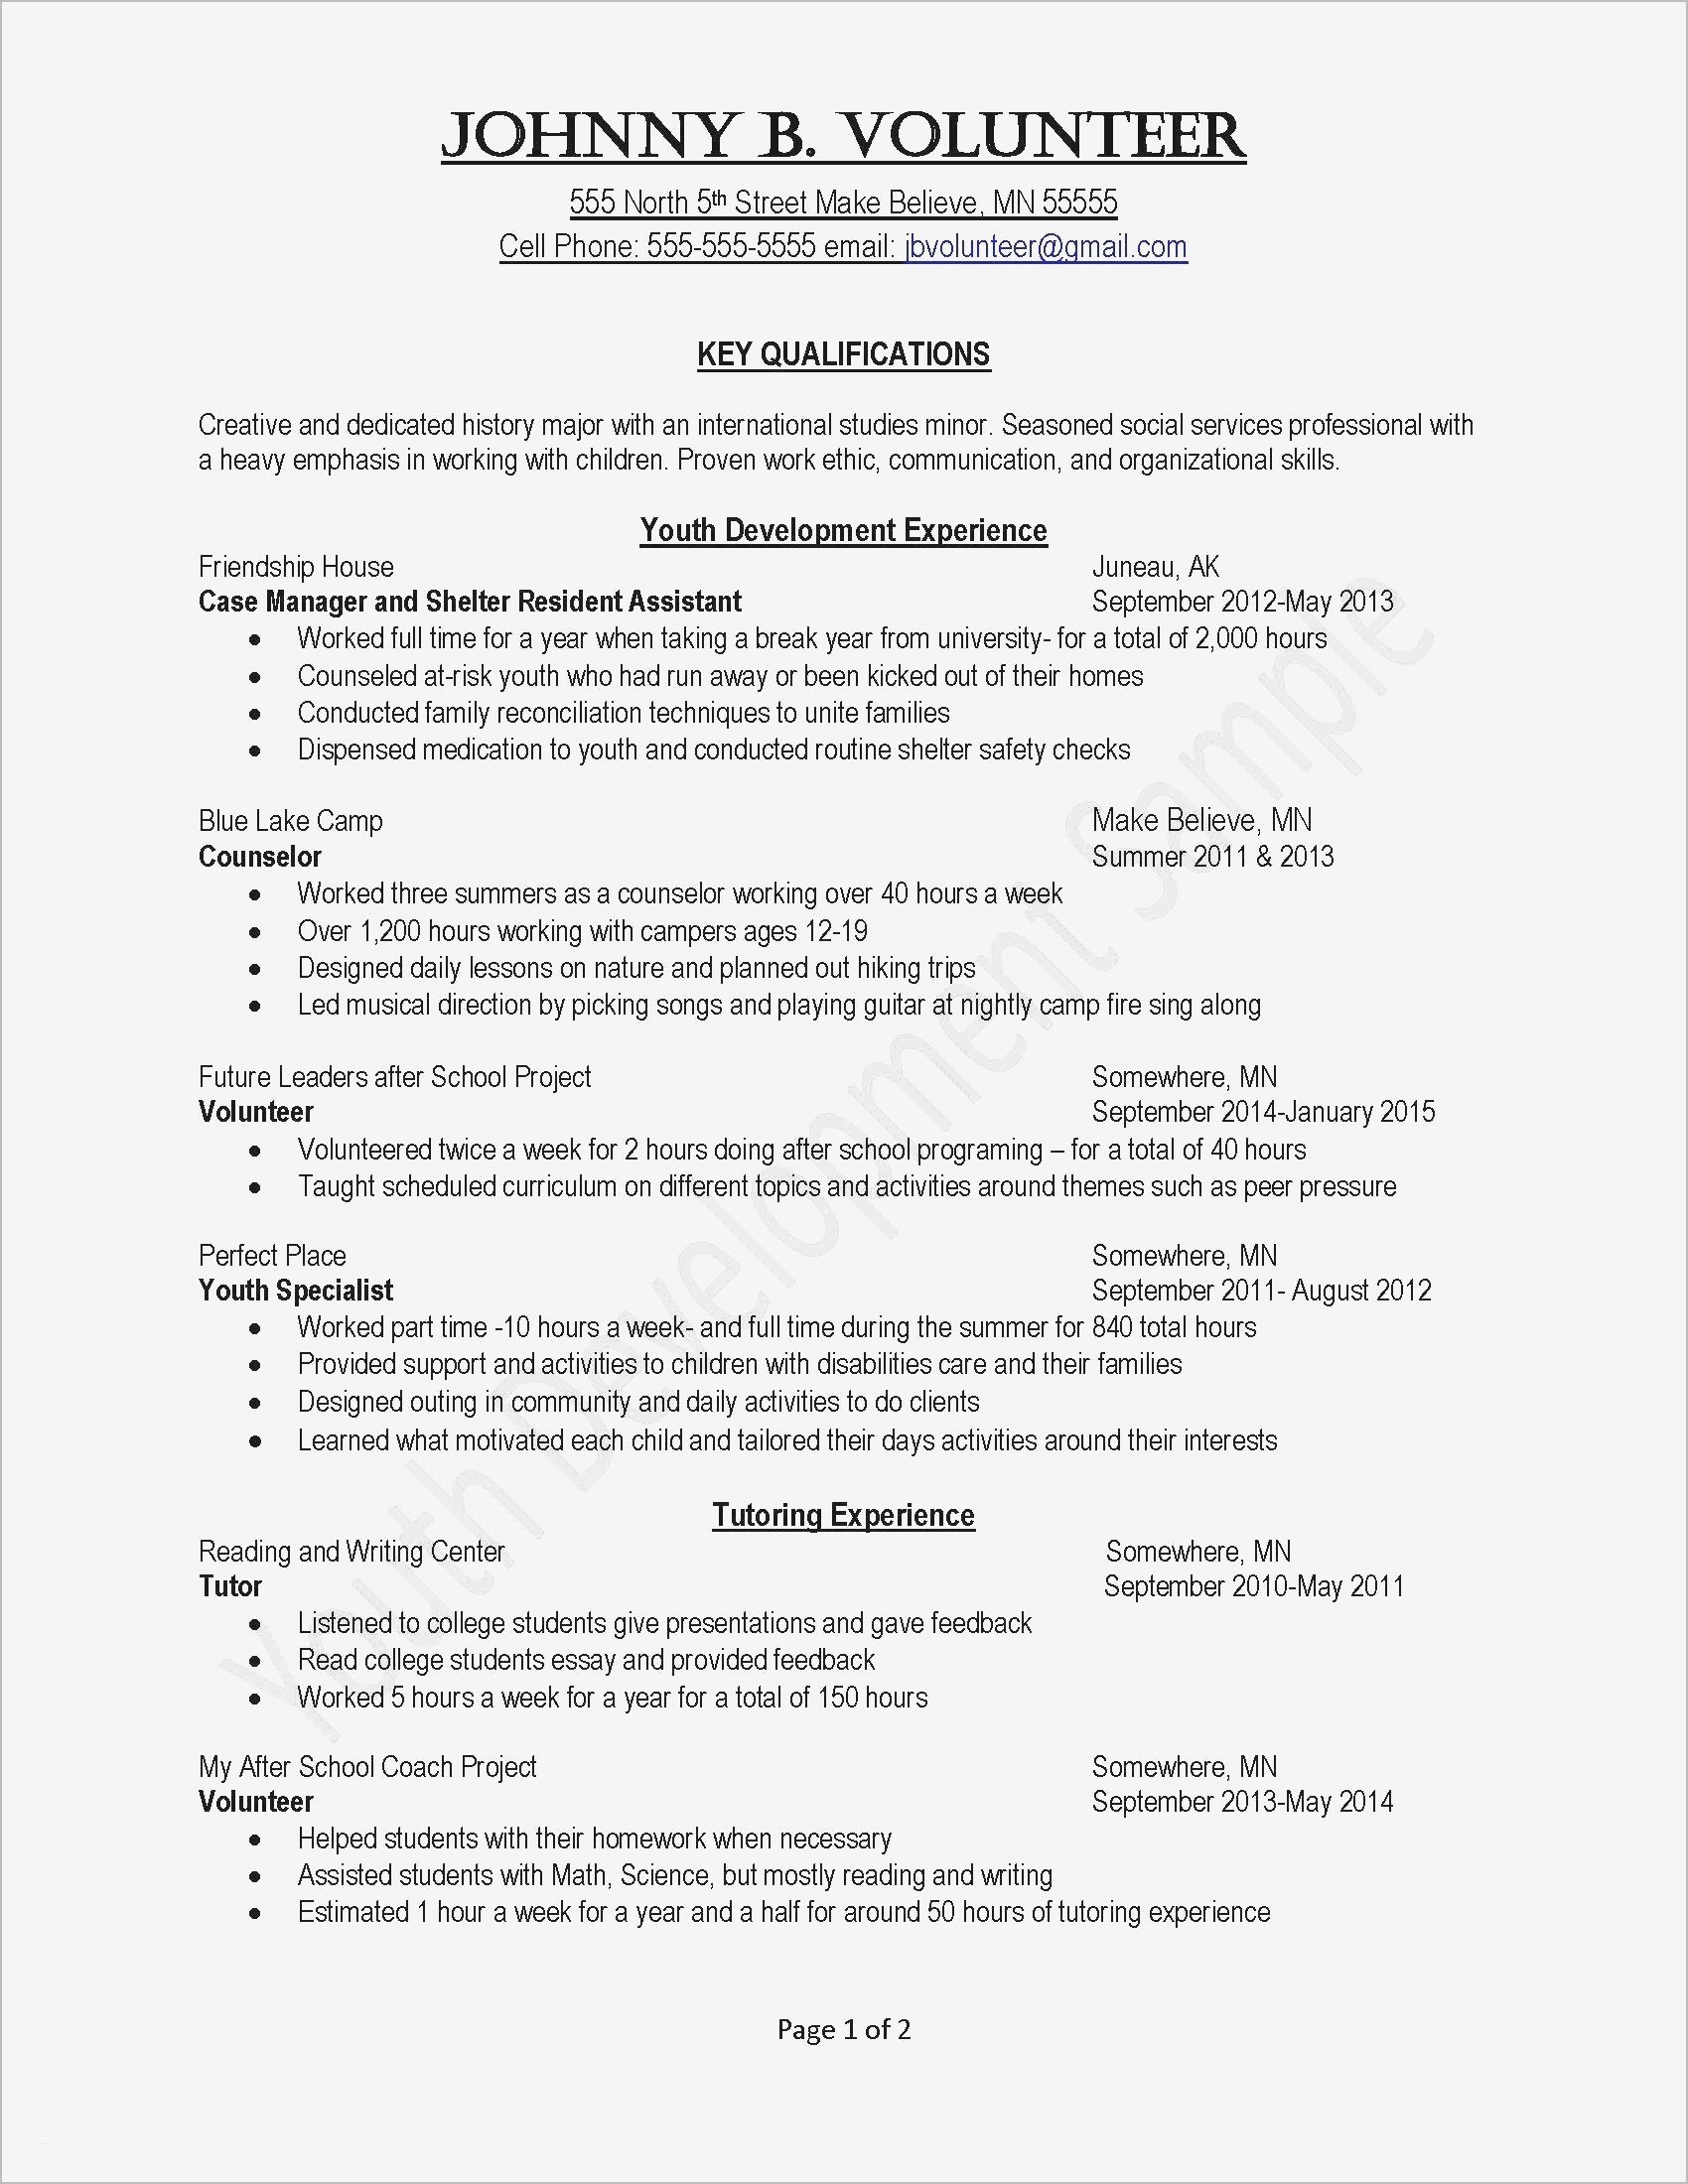 Application Cover Letter Template - Copy A Cover Letter for A Job Application Beautiful Elegant Job